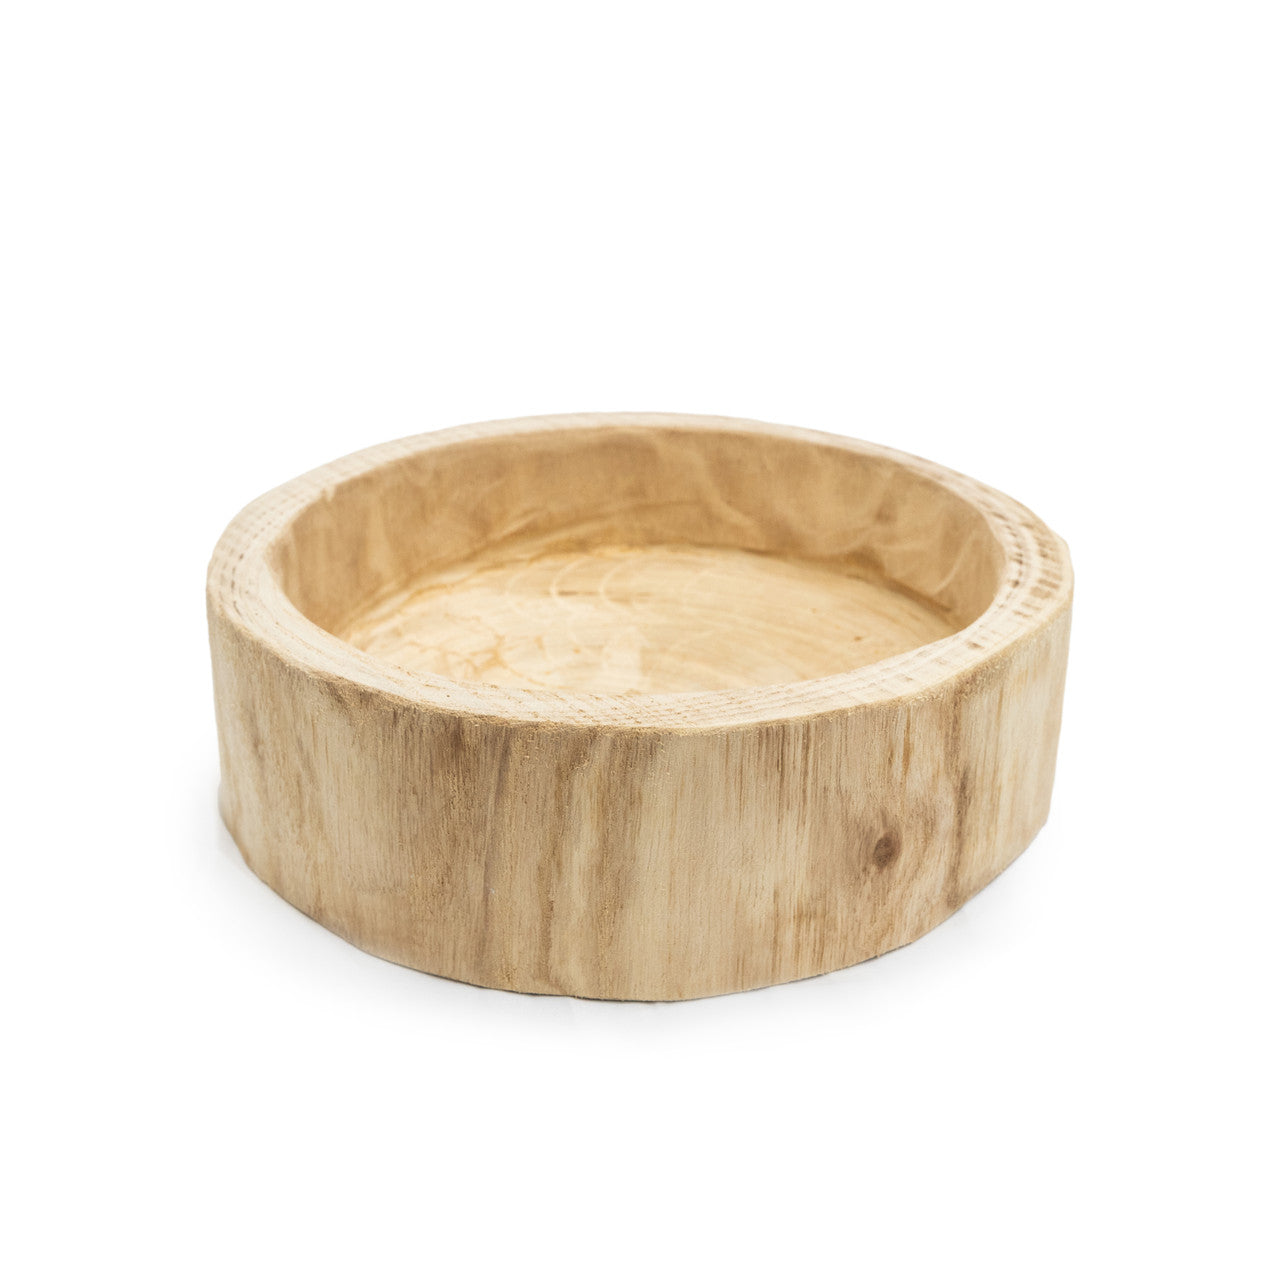 Shallow Round Wooden Bowl